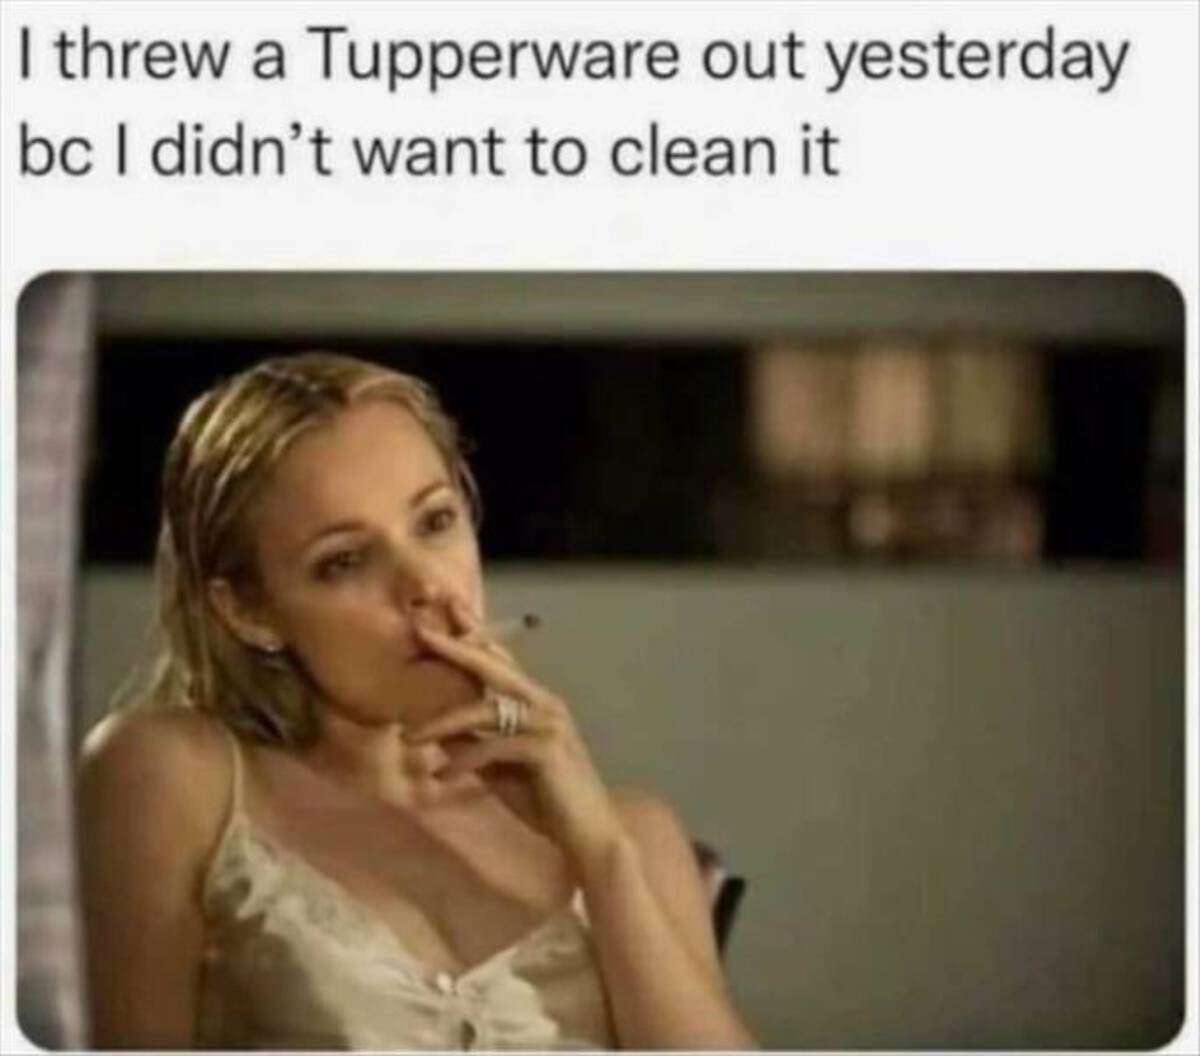 threw out a tupperware because i didn t want to wash it - I threw a Tupperware out yesterday bc I didn't want to clean it